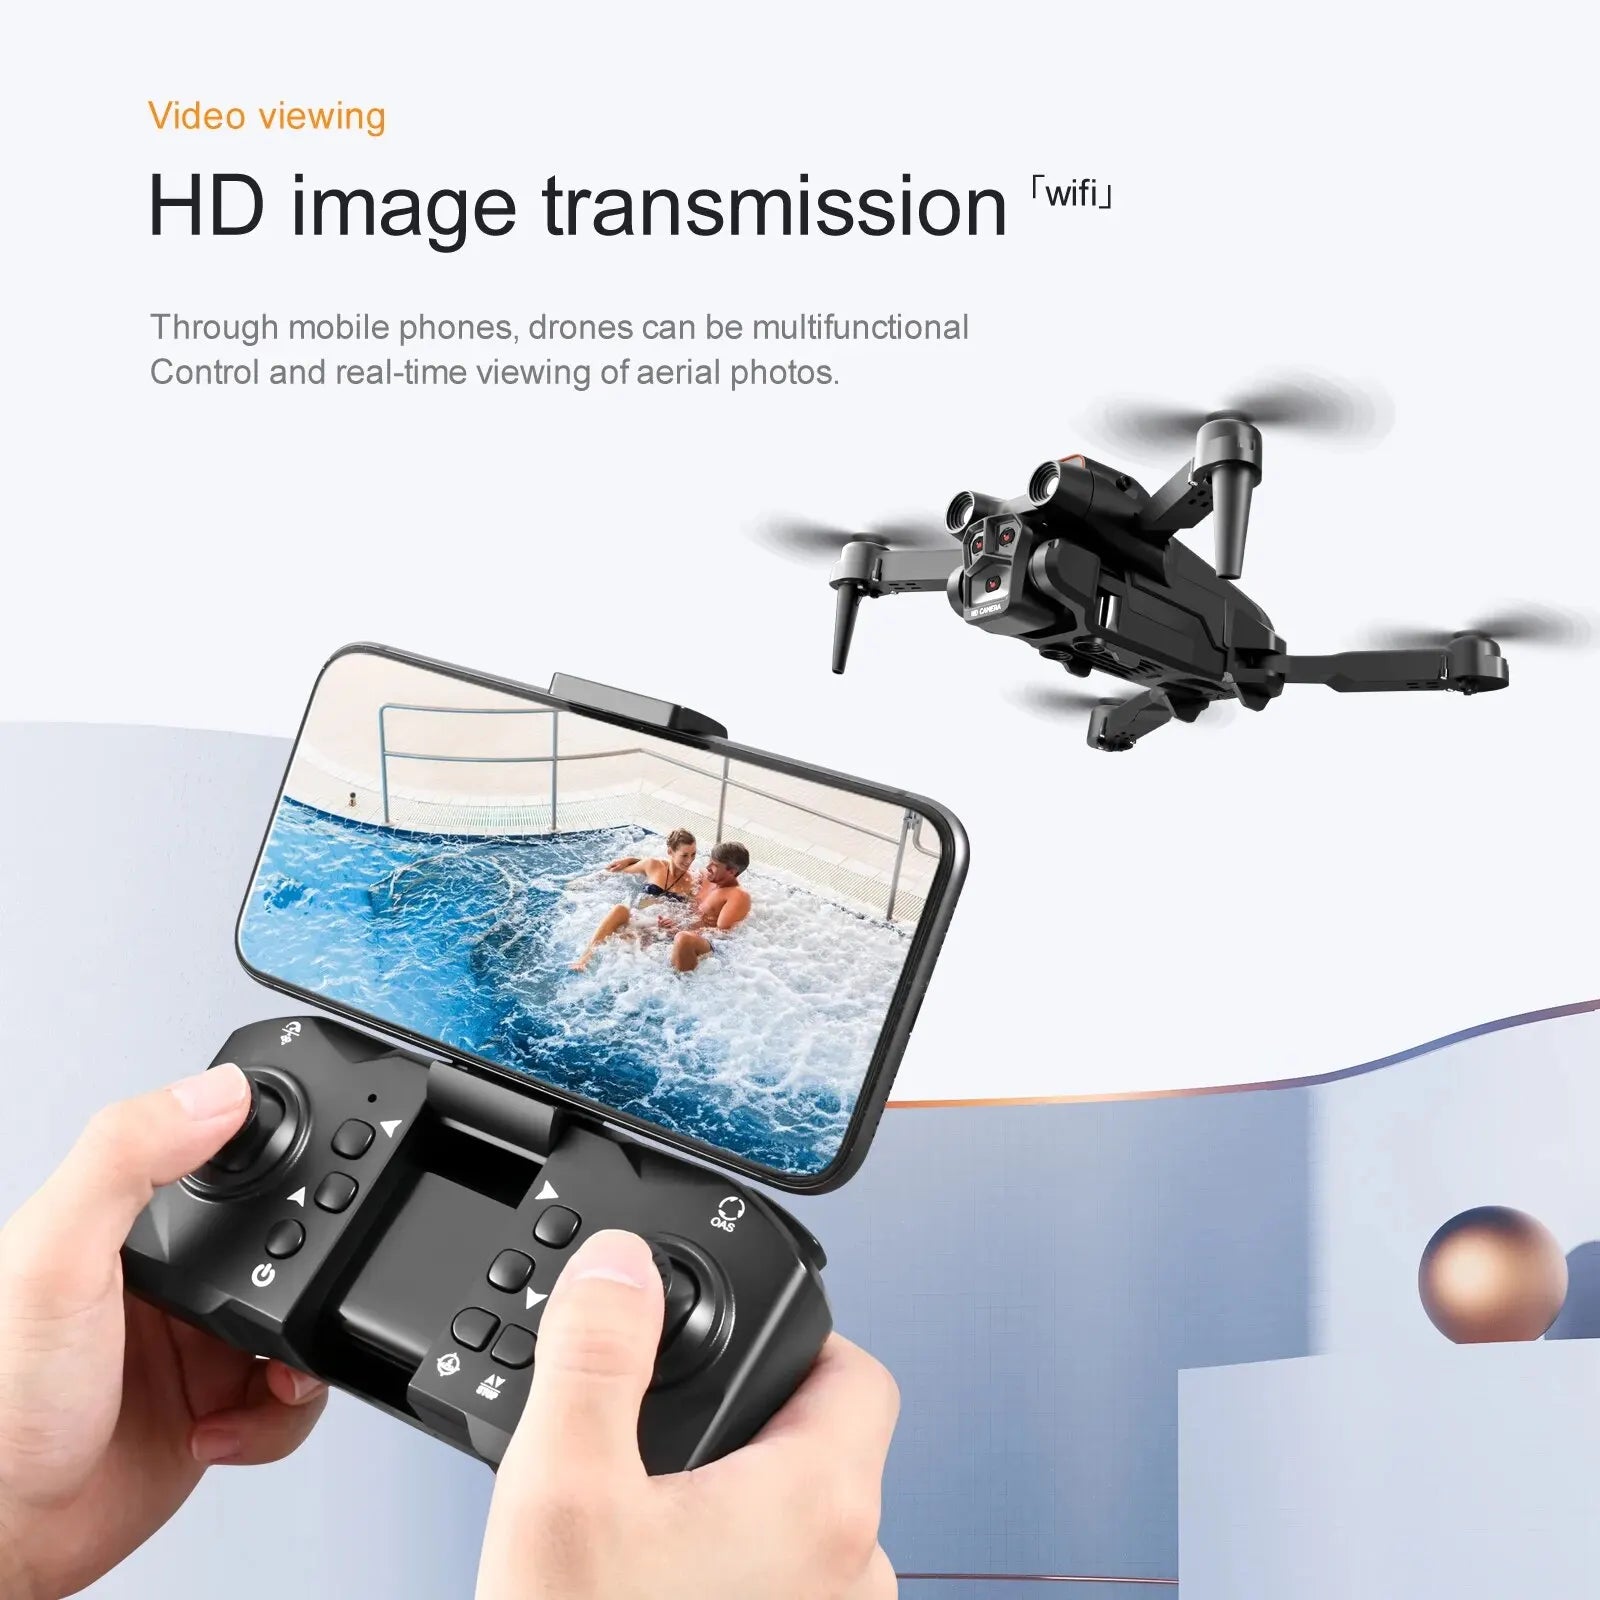 S92 Drone, drones can be multifunctional control and real-time viewing of aerial